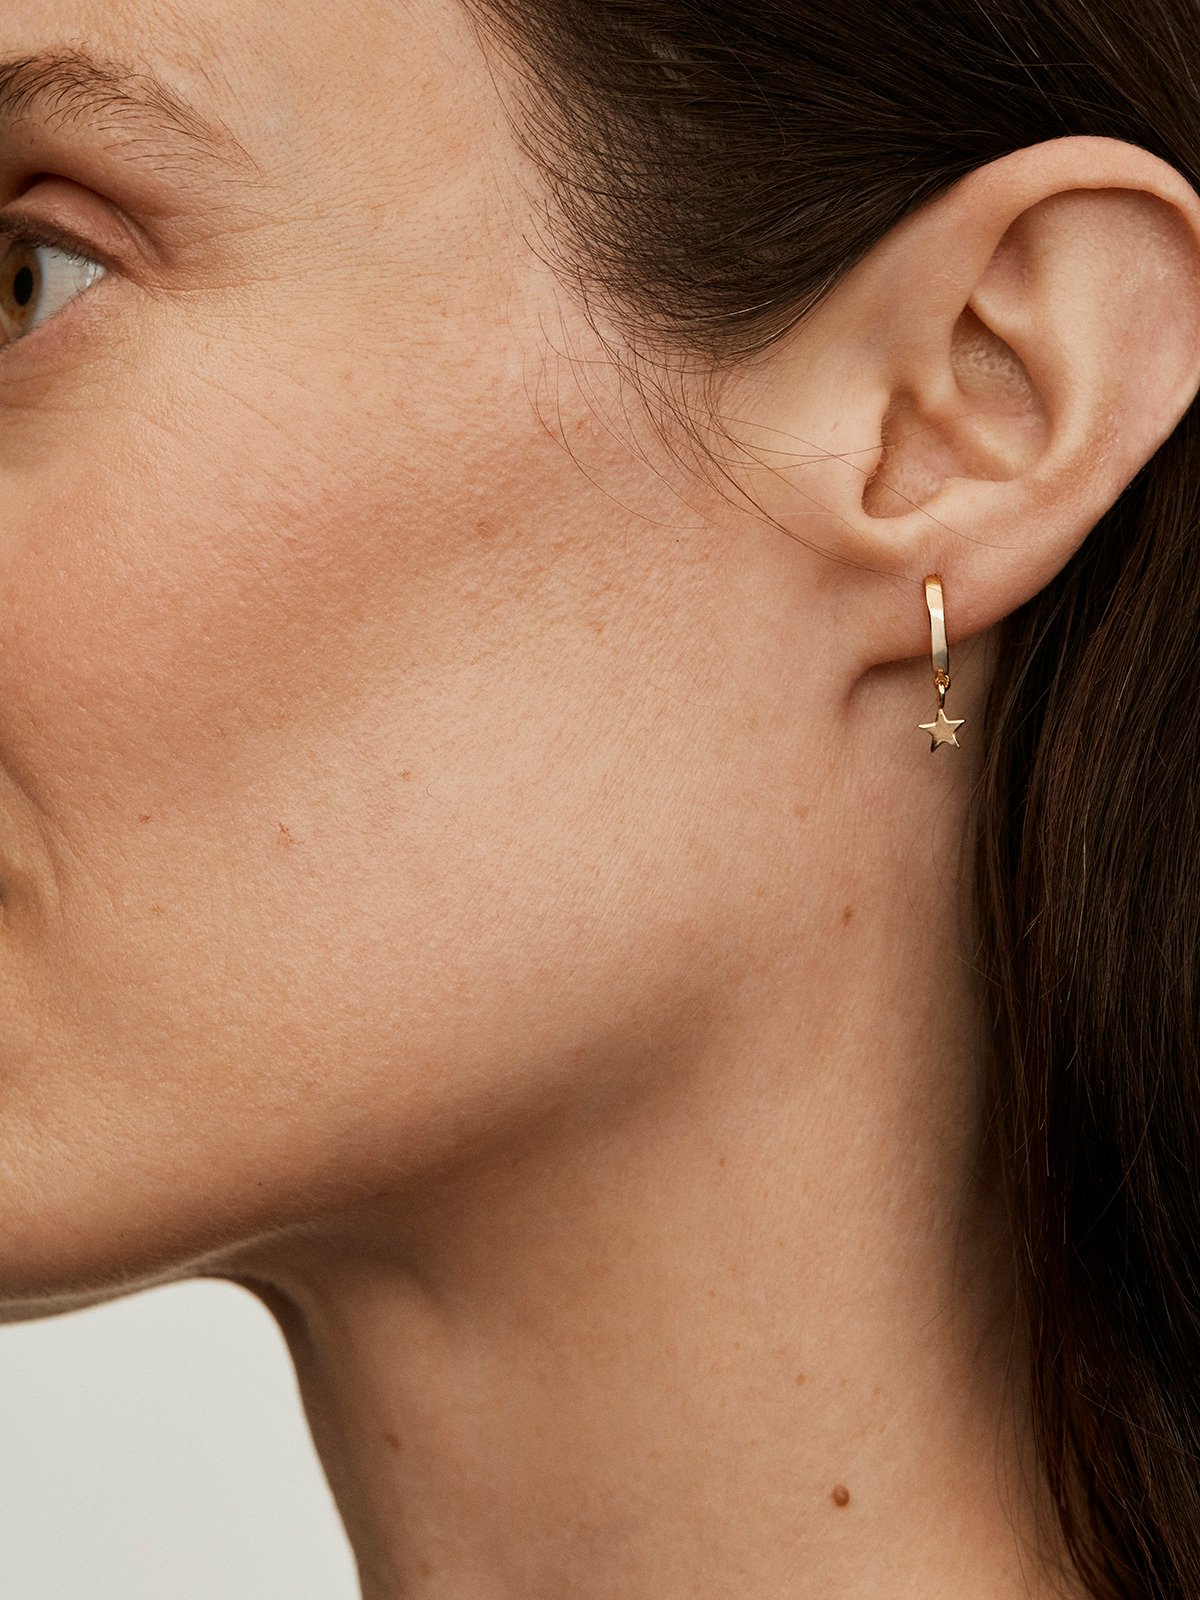 Small hoop earrings made of 925 silver, bathed in 18K yellow gold with star.